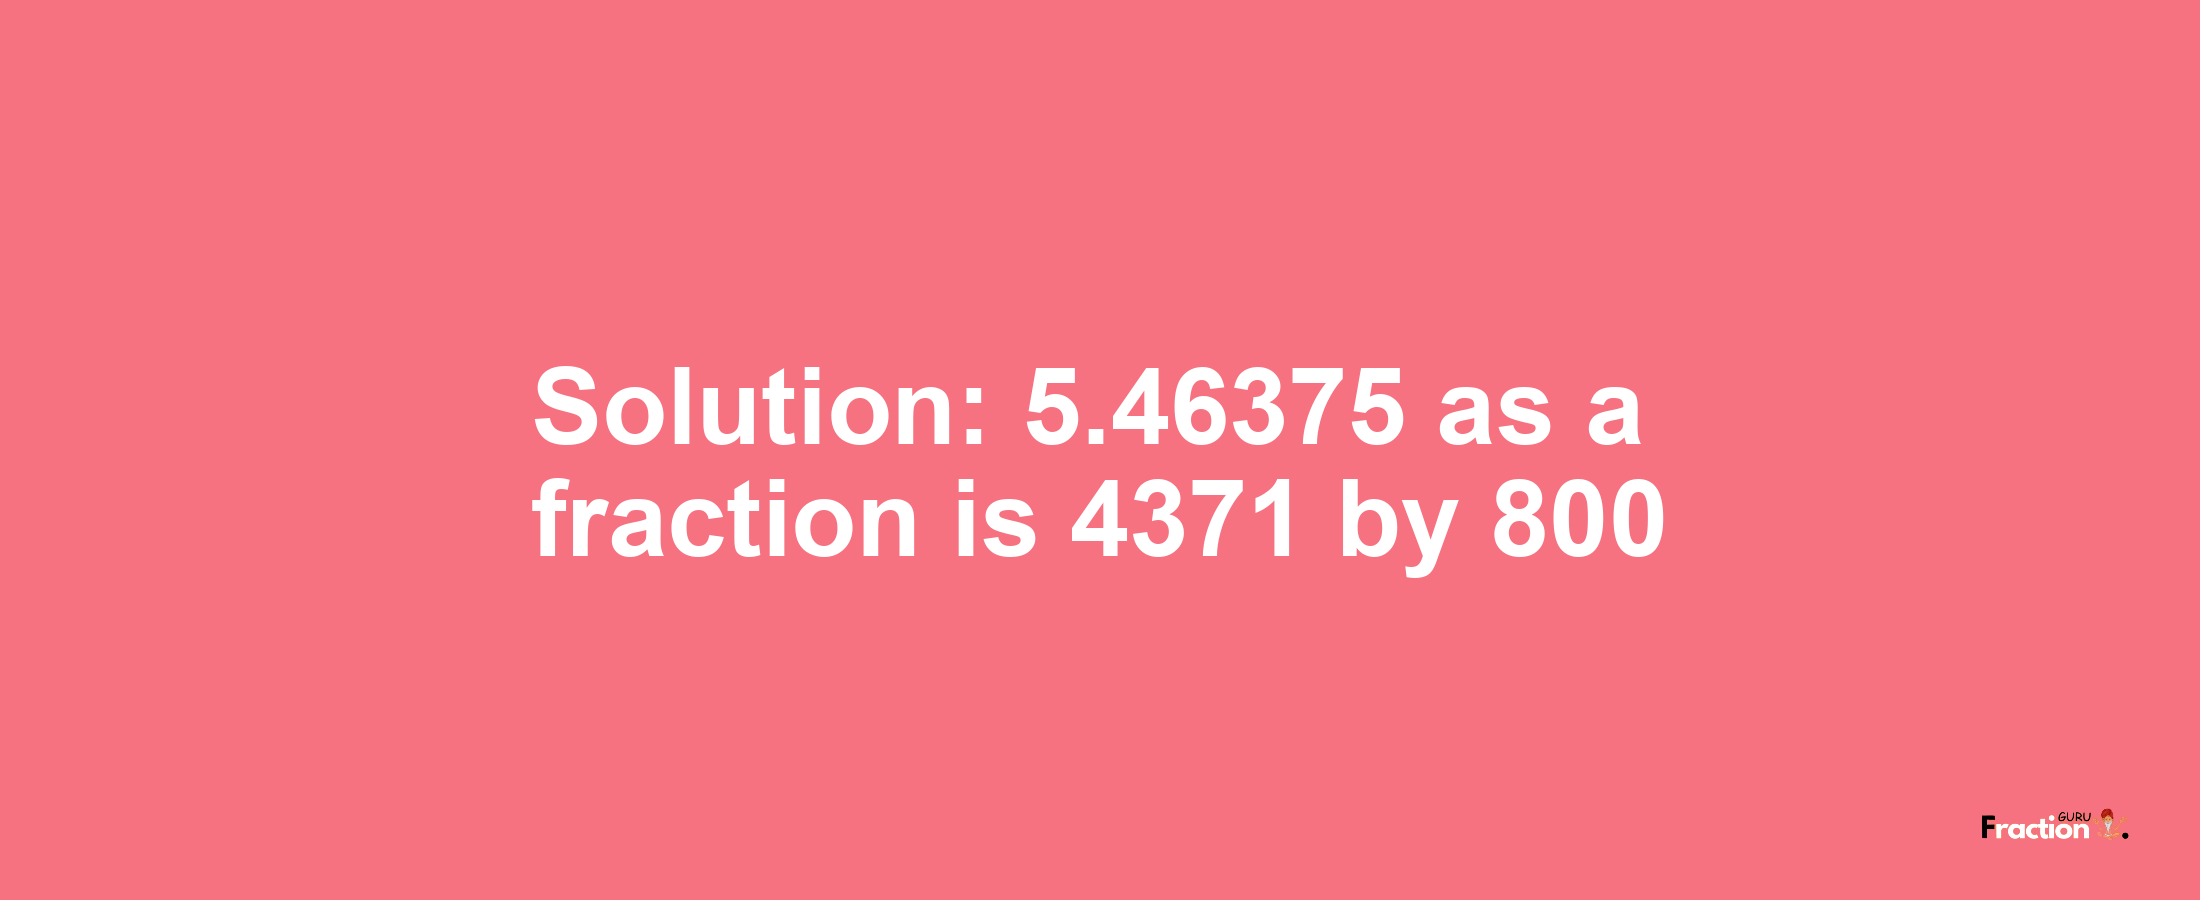 Solution:5.46375 as a fraction is 4371/800